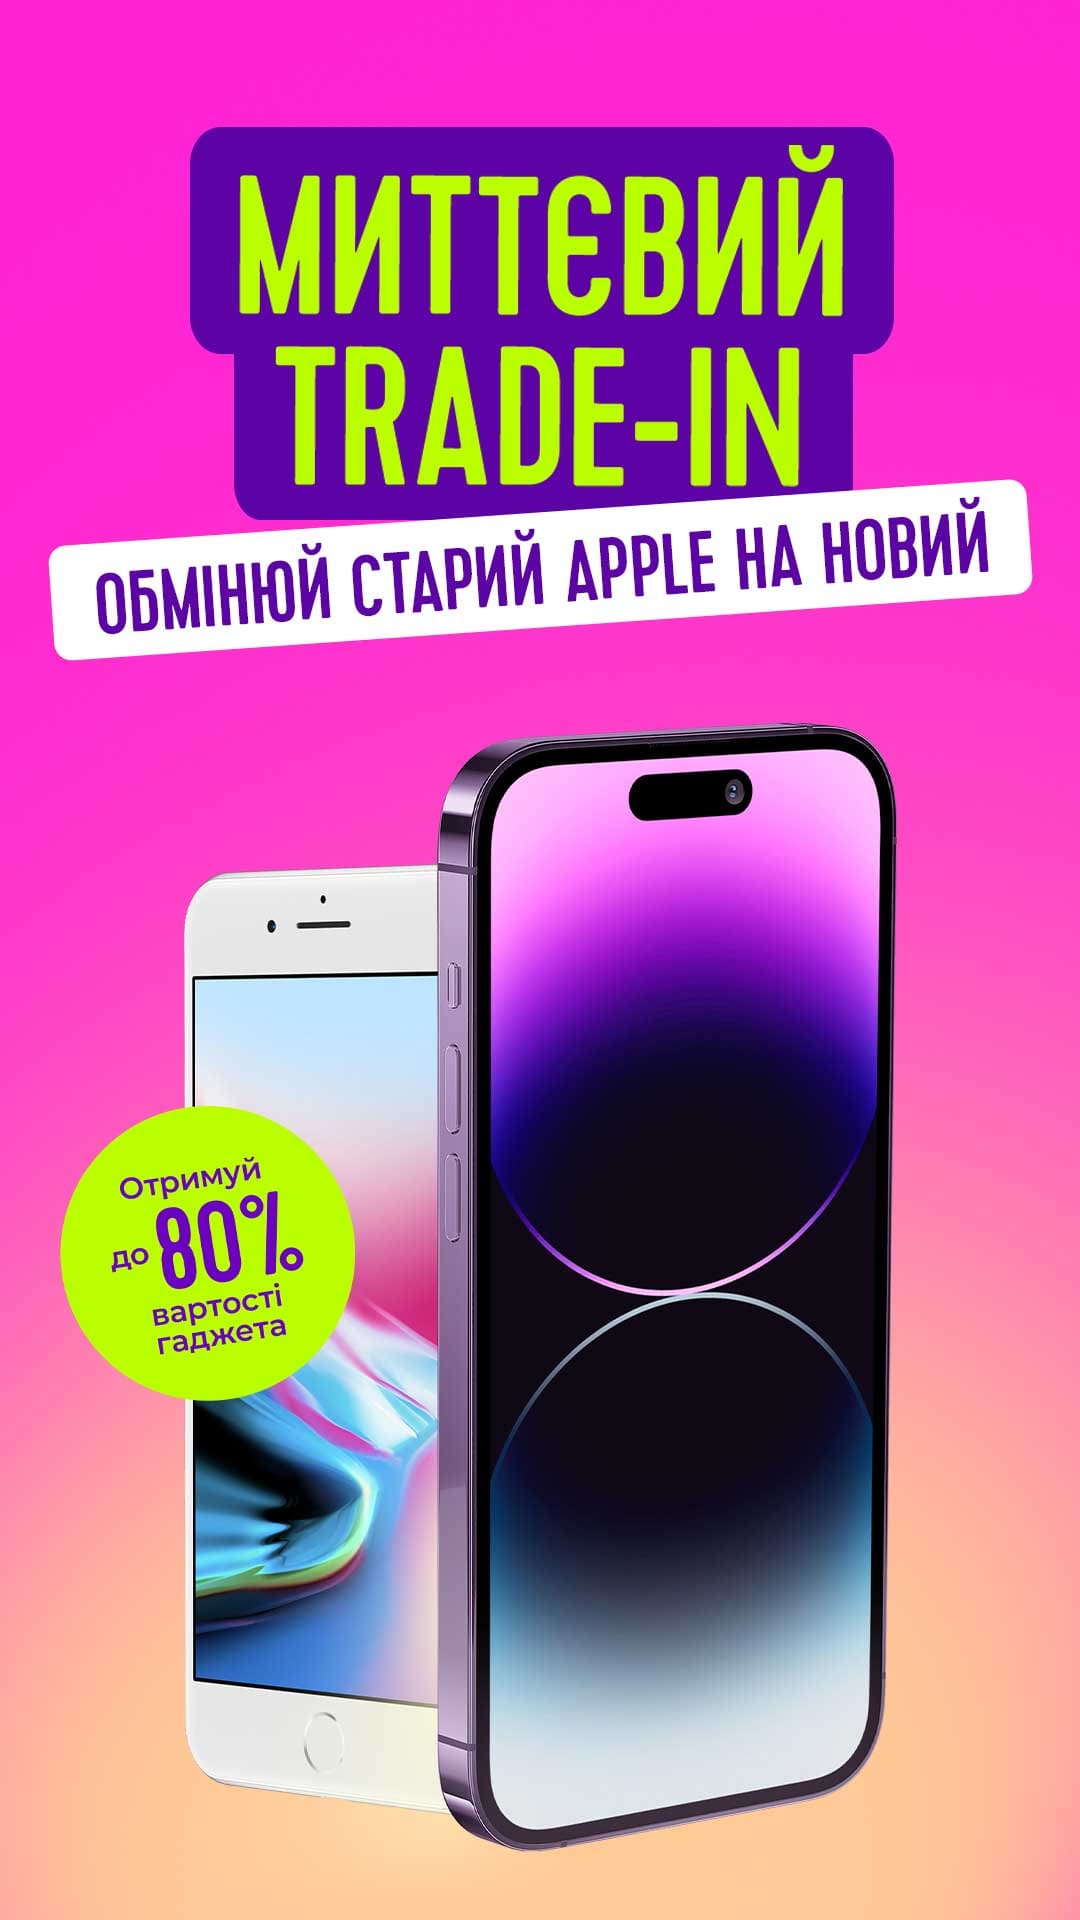 ! - Trade-in